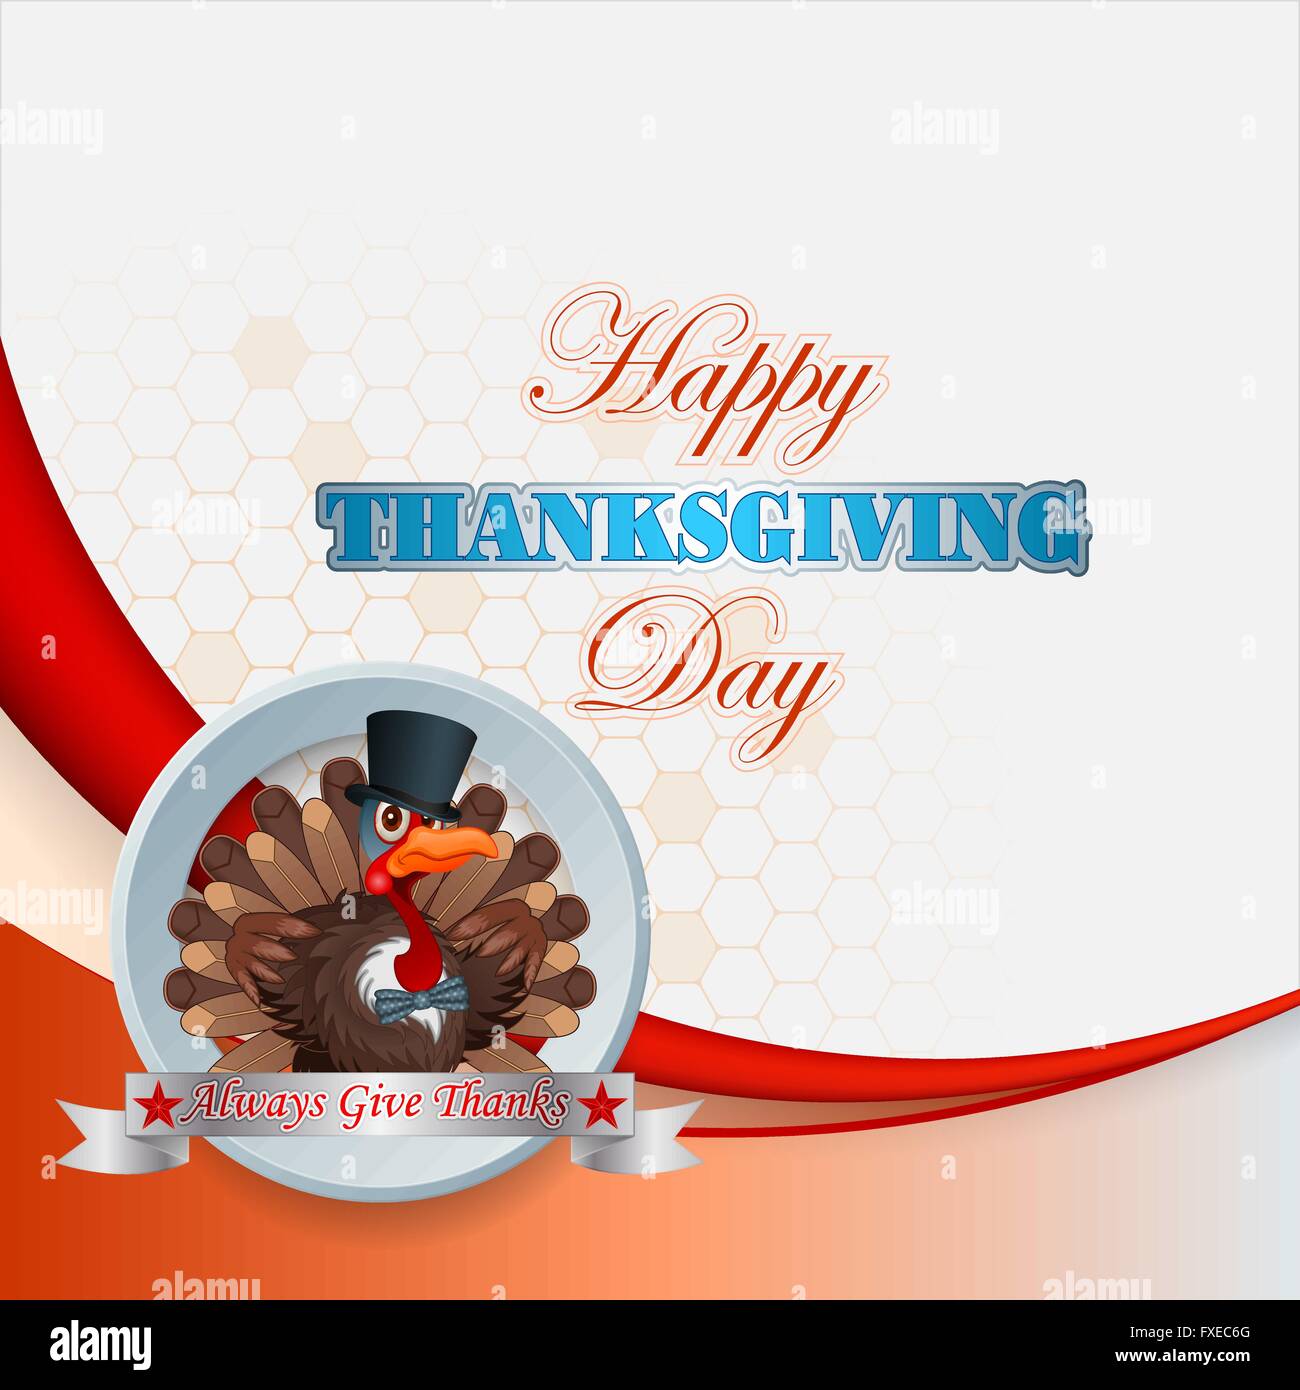 Happy Thanksgiving design with cartoon turkey very proud of his appearance, wearing a top hat and bow tie Stock Vector